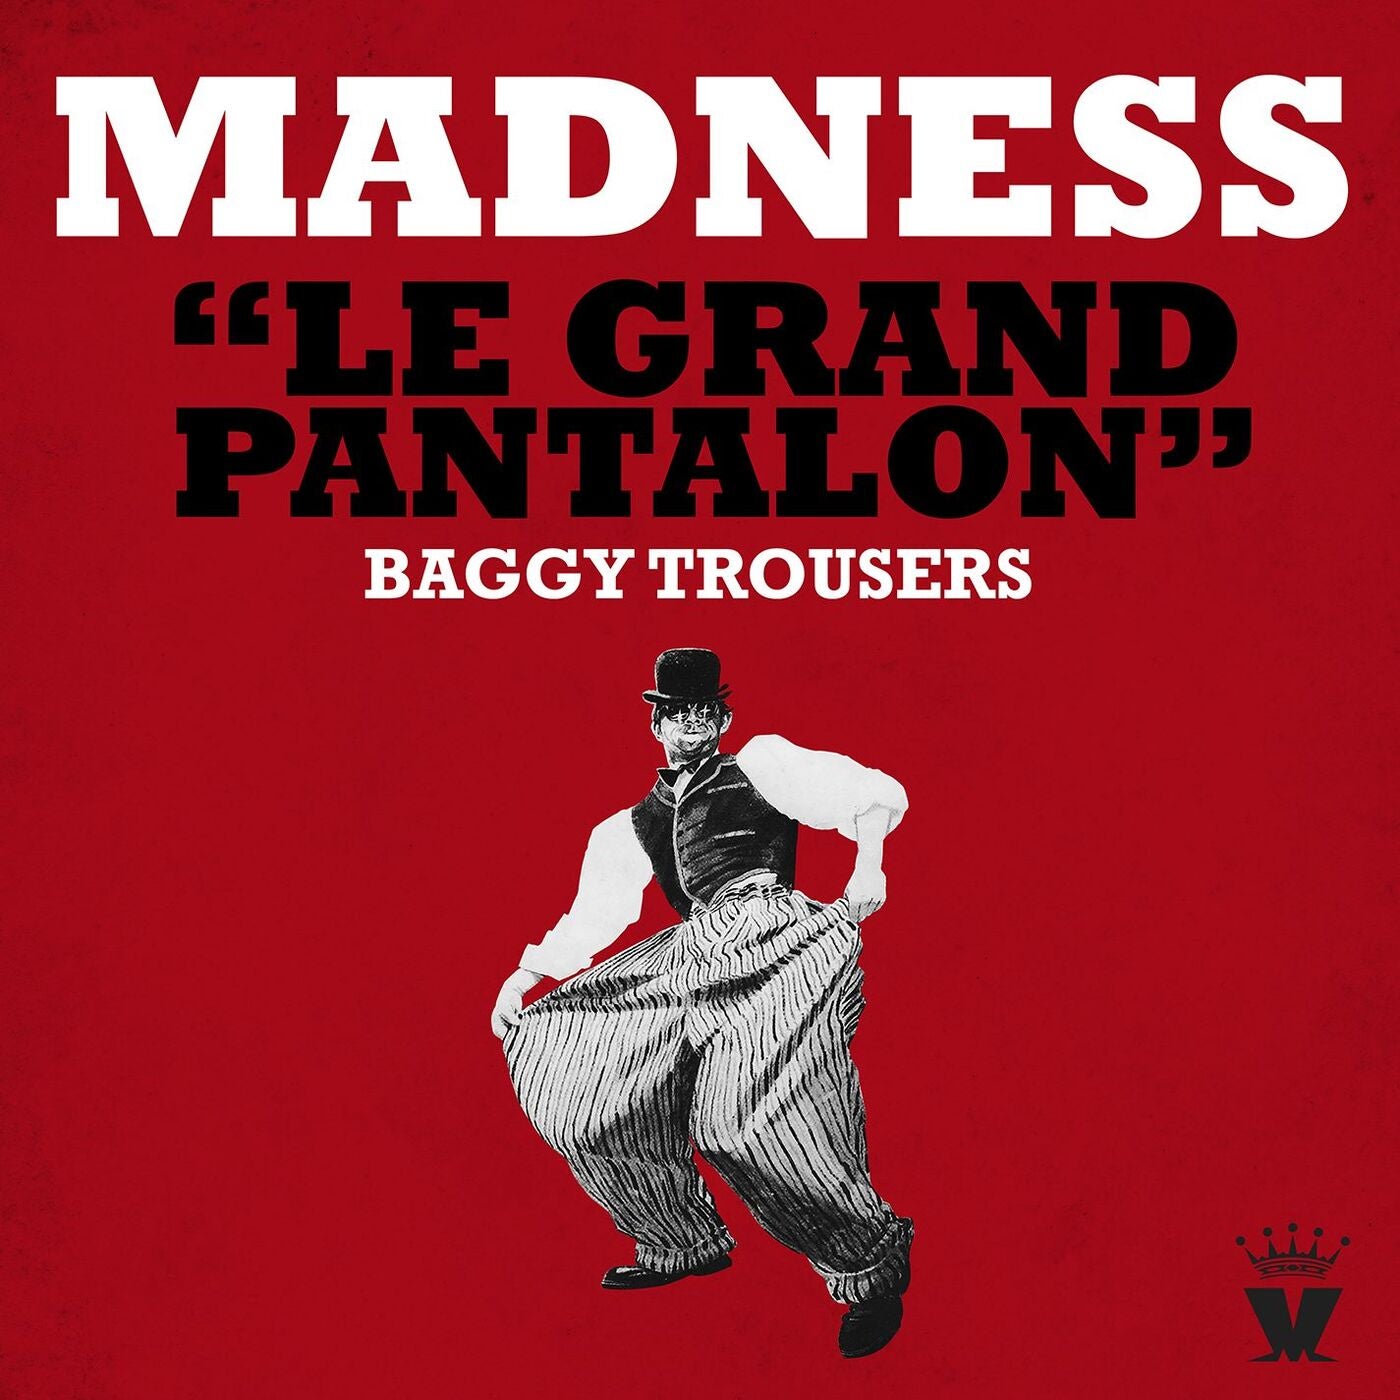 Baggy Trousers - 2010 Remaster - song and lyrics by Madness | Spotify